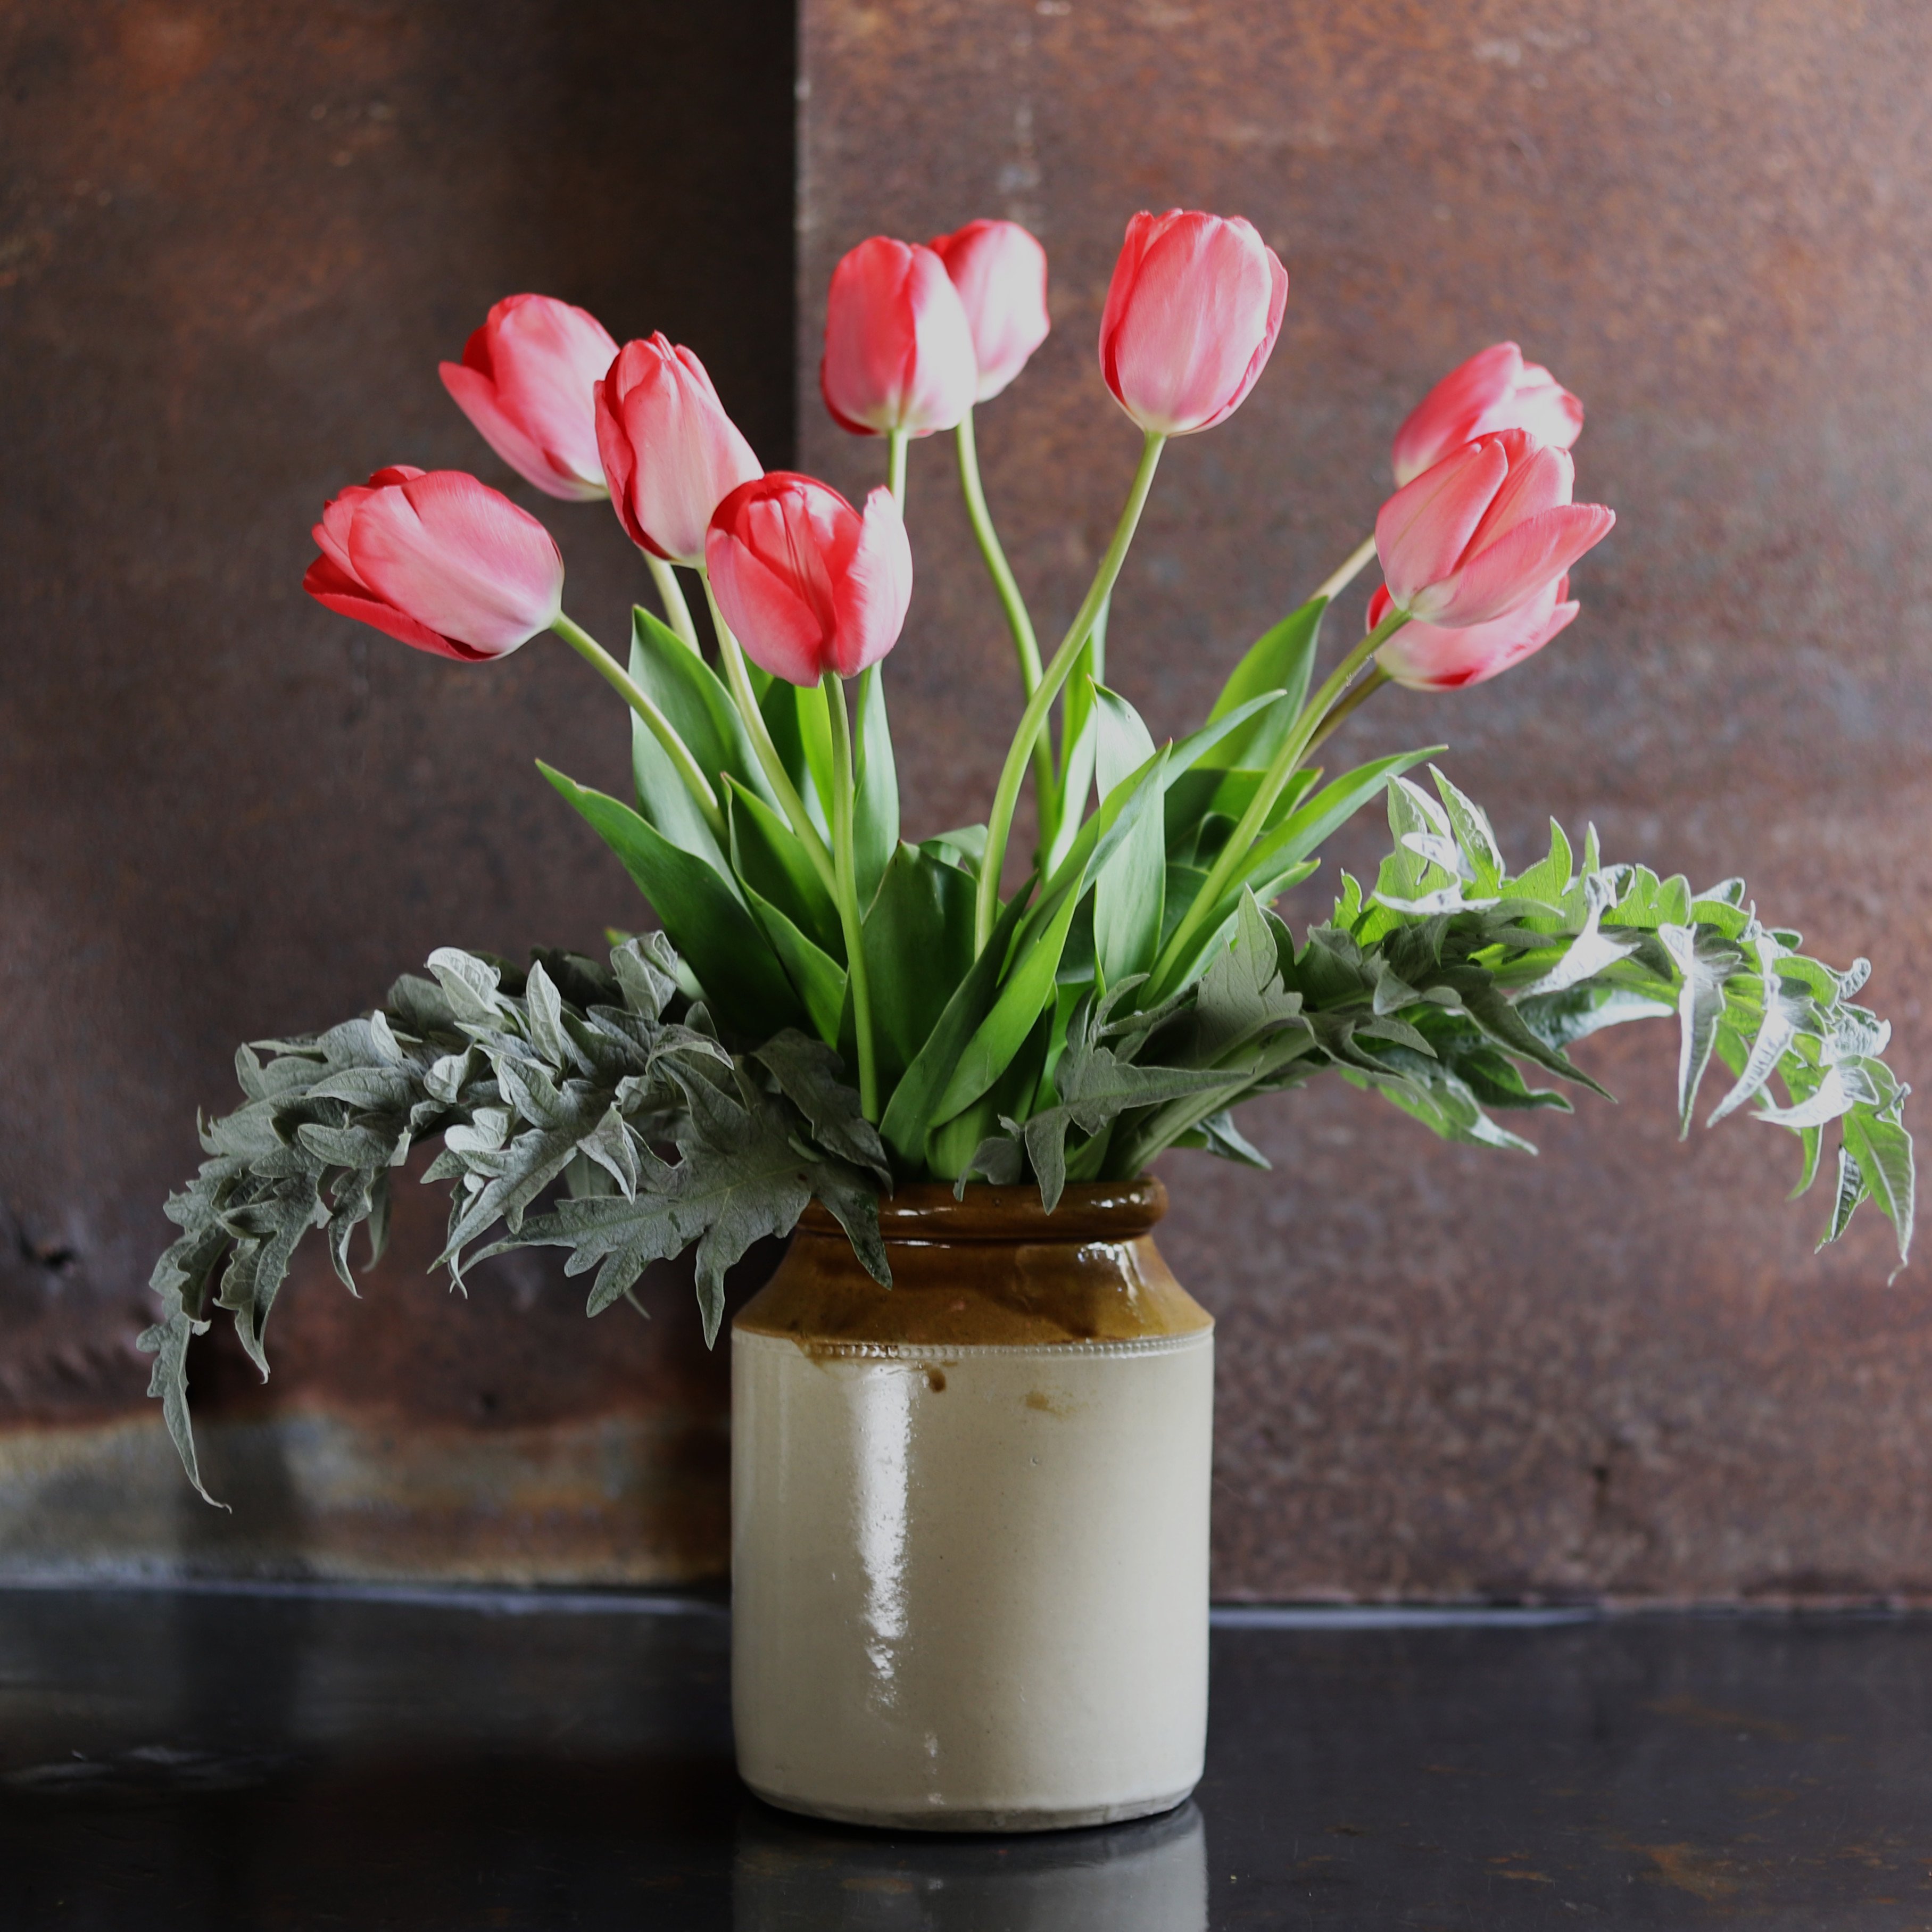 tulips and artichoke leaves in a stunning display